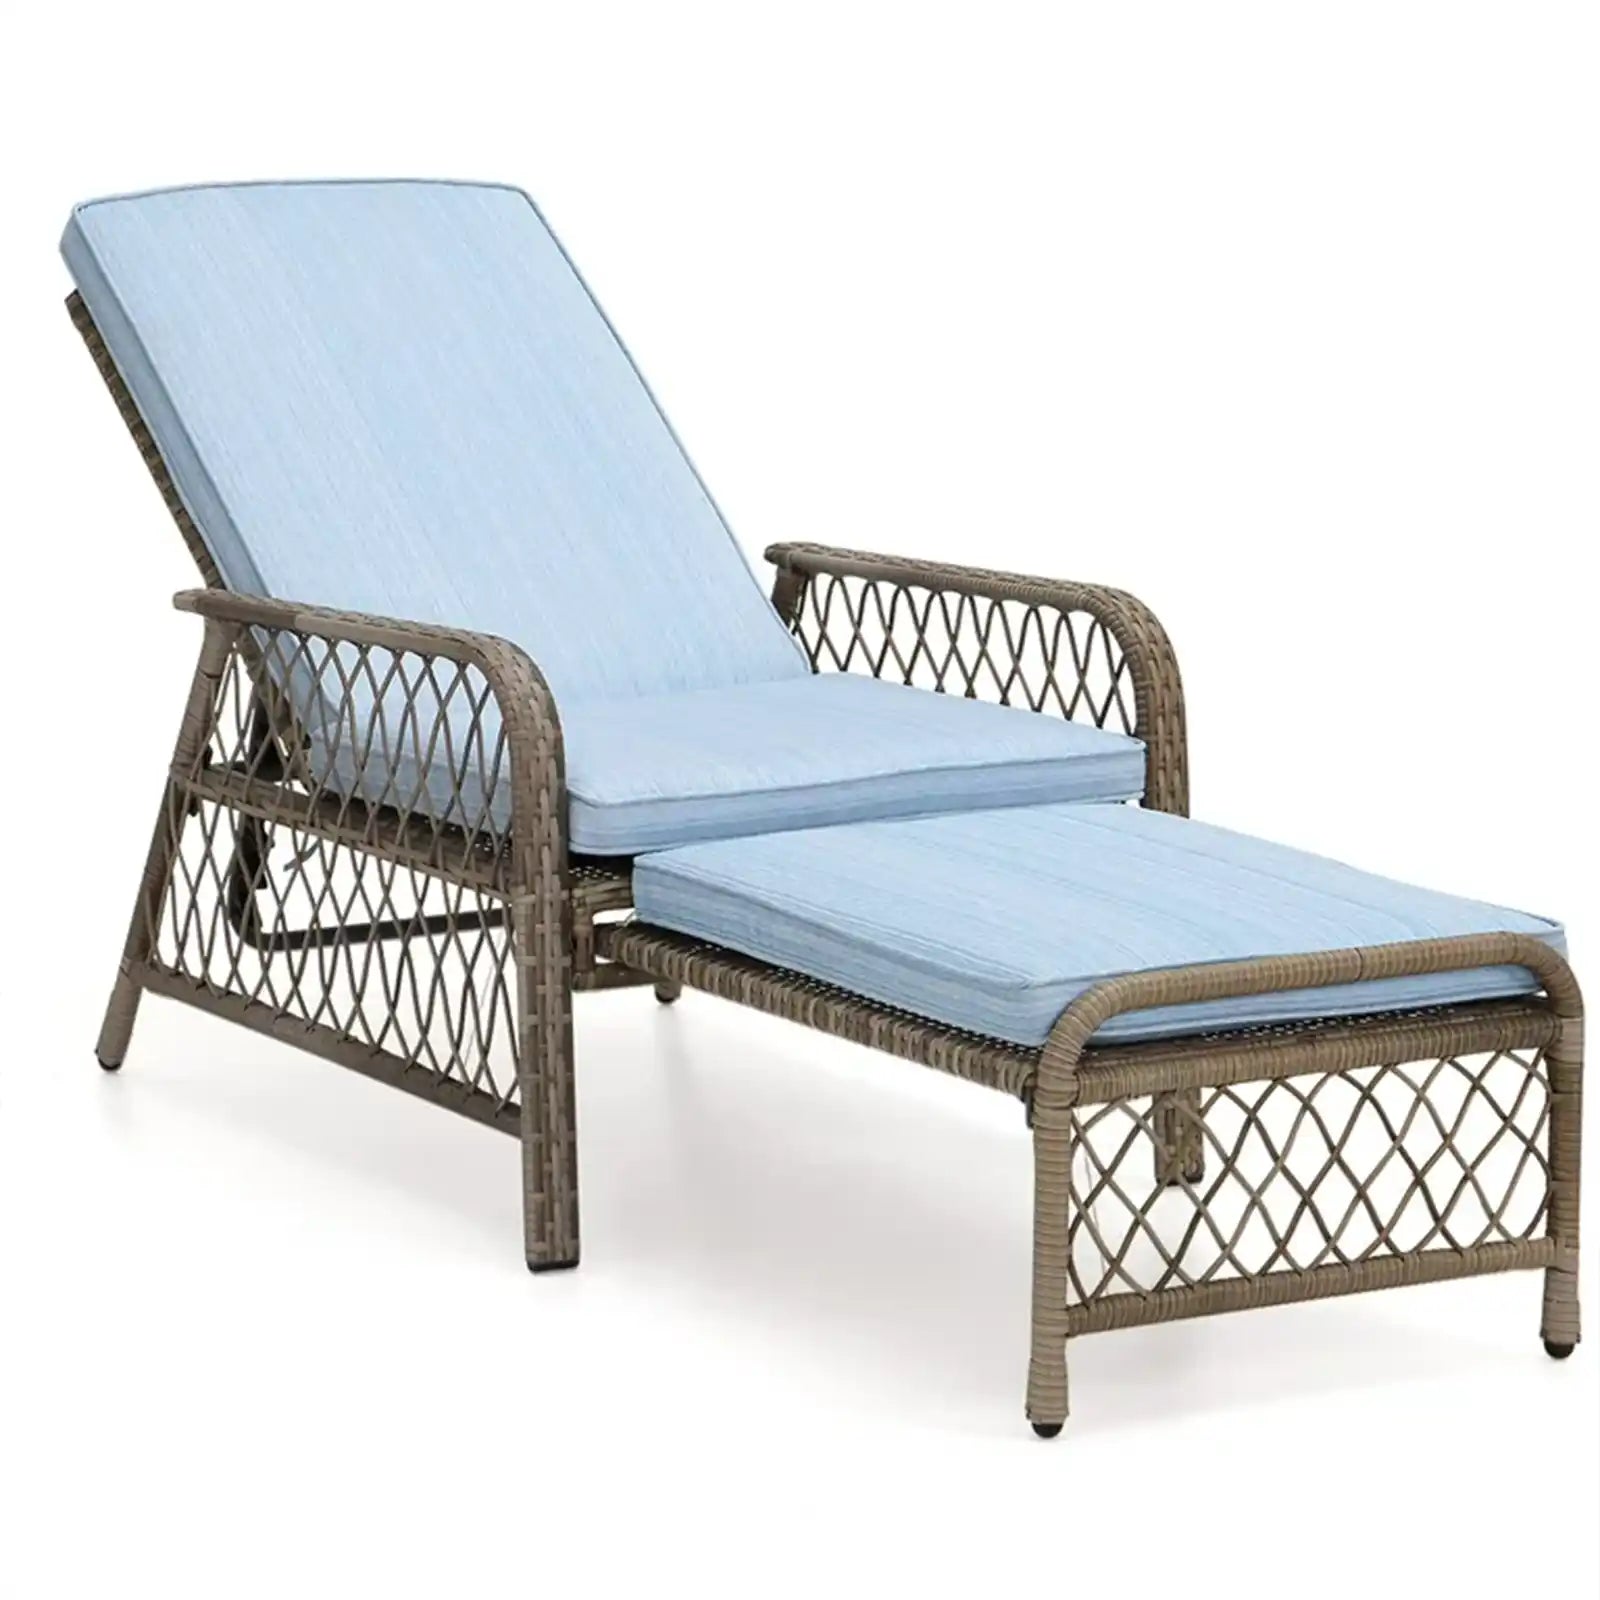 Outdoor Chair Lounge Chair Adjustable 5 Position with Cushions Retractable Foot-Rest - Steel Frame Material Wicker Rattan